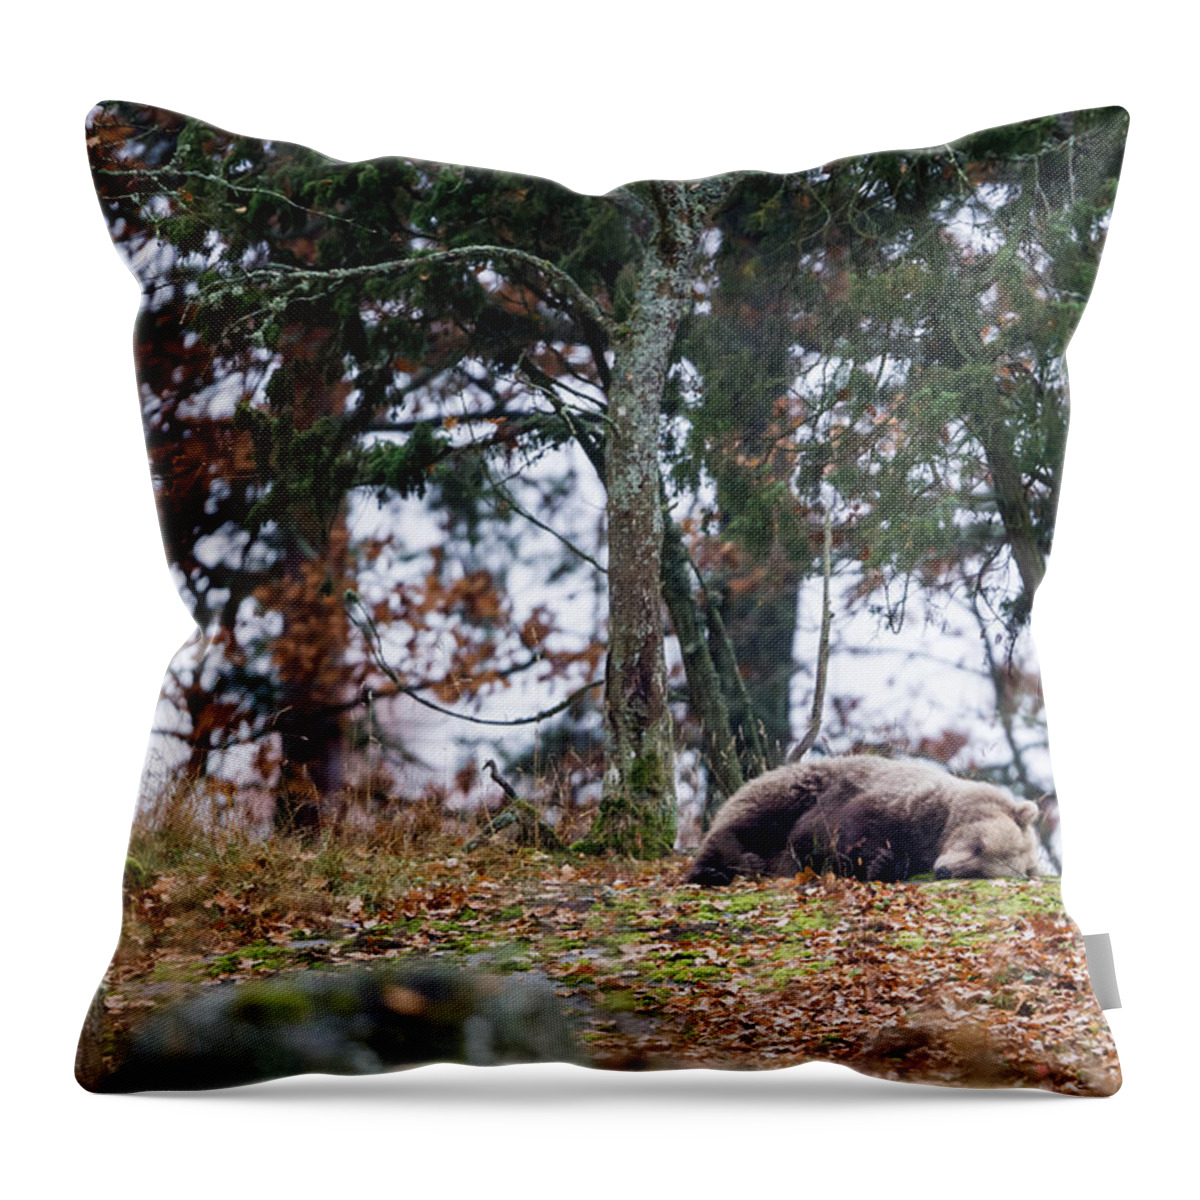 Bear Throw Pillow featuring the photograph Sleeping Bear by Torbjorn Swenelius